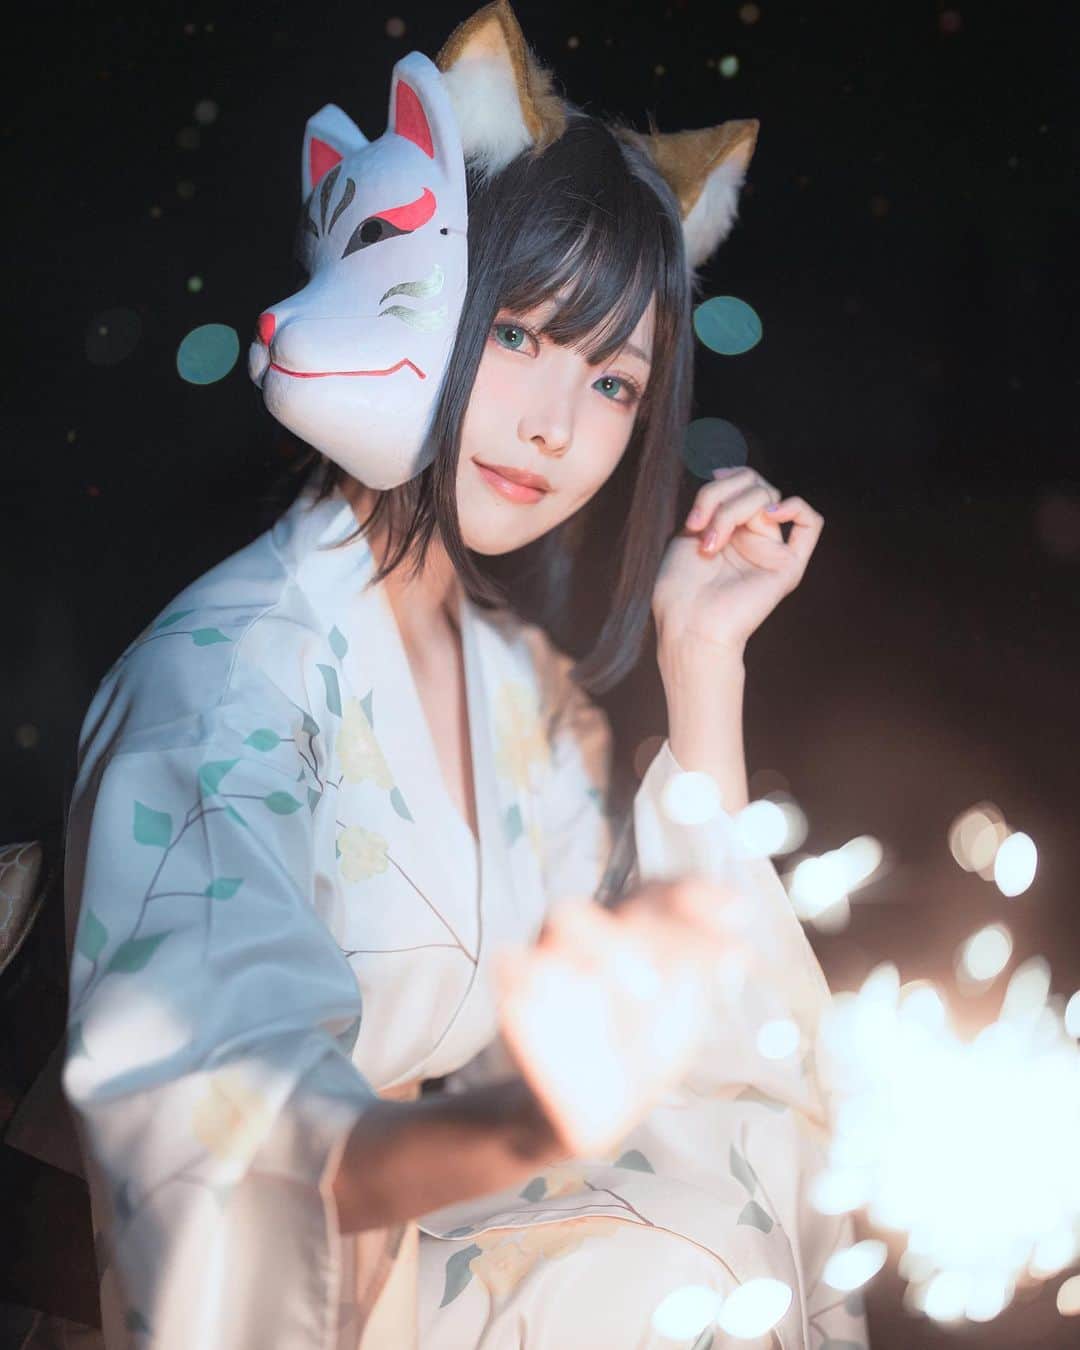 Elyのインスタグラム：「Memories of a Summer Yukata Date with Miss Fox, Fleeting like fireworks.🎇 "Please don't forget about me." Full 24 pics in this month set C💌 ✧～✧～✧  どんぎつねさんとの浴衣デート、 儚い思い出は花火のよう🎇  "私のこと、忘れないでね"  今月のCセット写真､24枚収録します✨ ✧～✧～✧  與狐狸小姐的夏日浴衣約會的回憶 彷彿像煙花般稍縱即逝🎇 "請不要忘記我喔"  完整寫真(24p)收錄在本月C組✨  #ely #elycosplay #cosplay #どんぎつね #ゆかた」